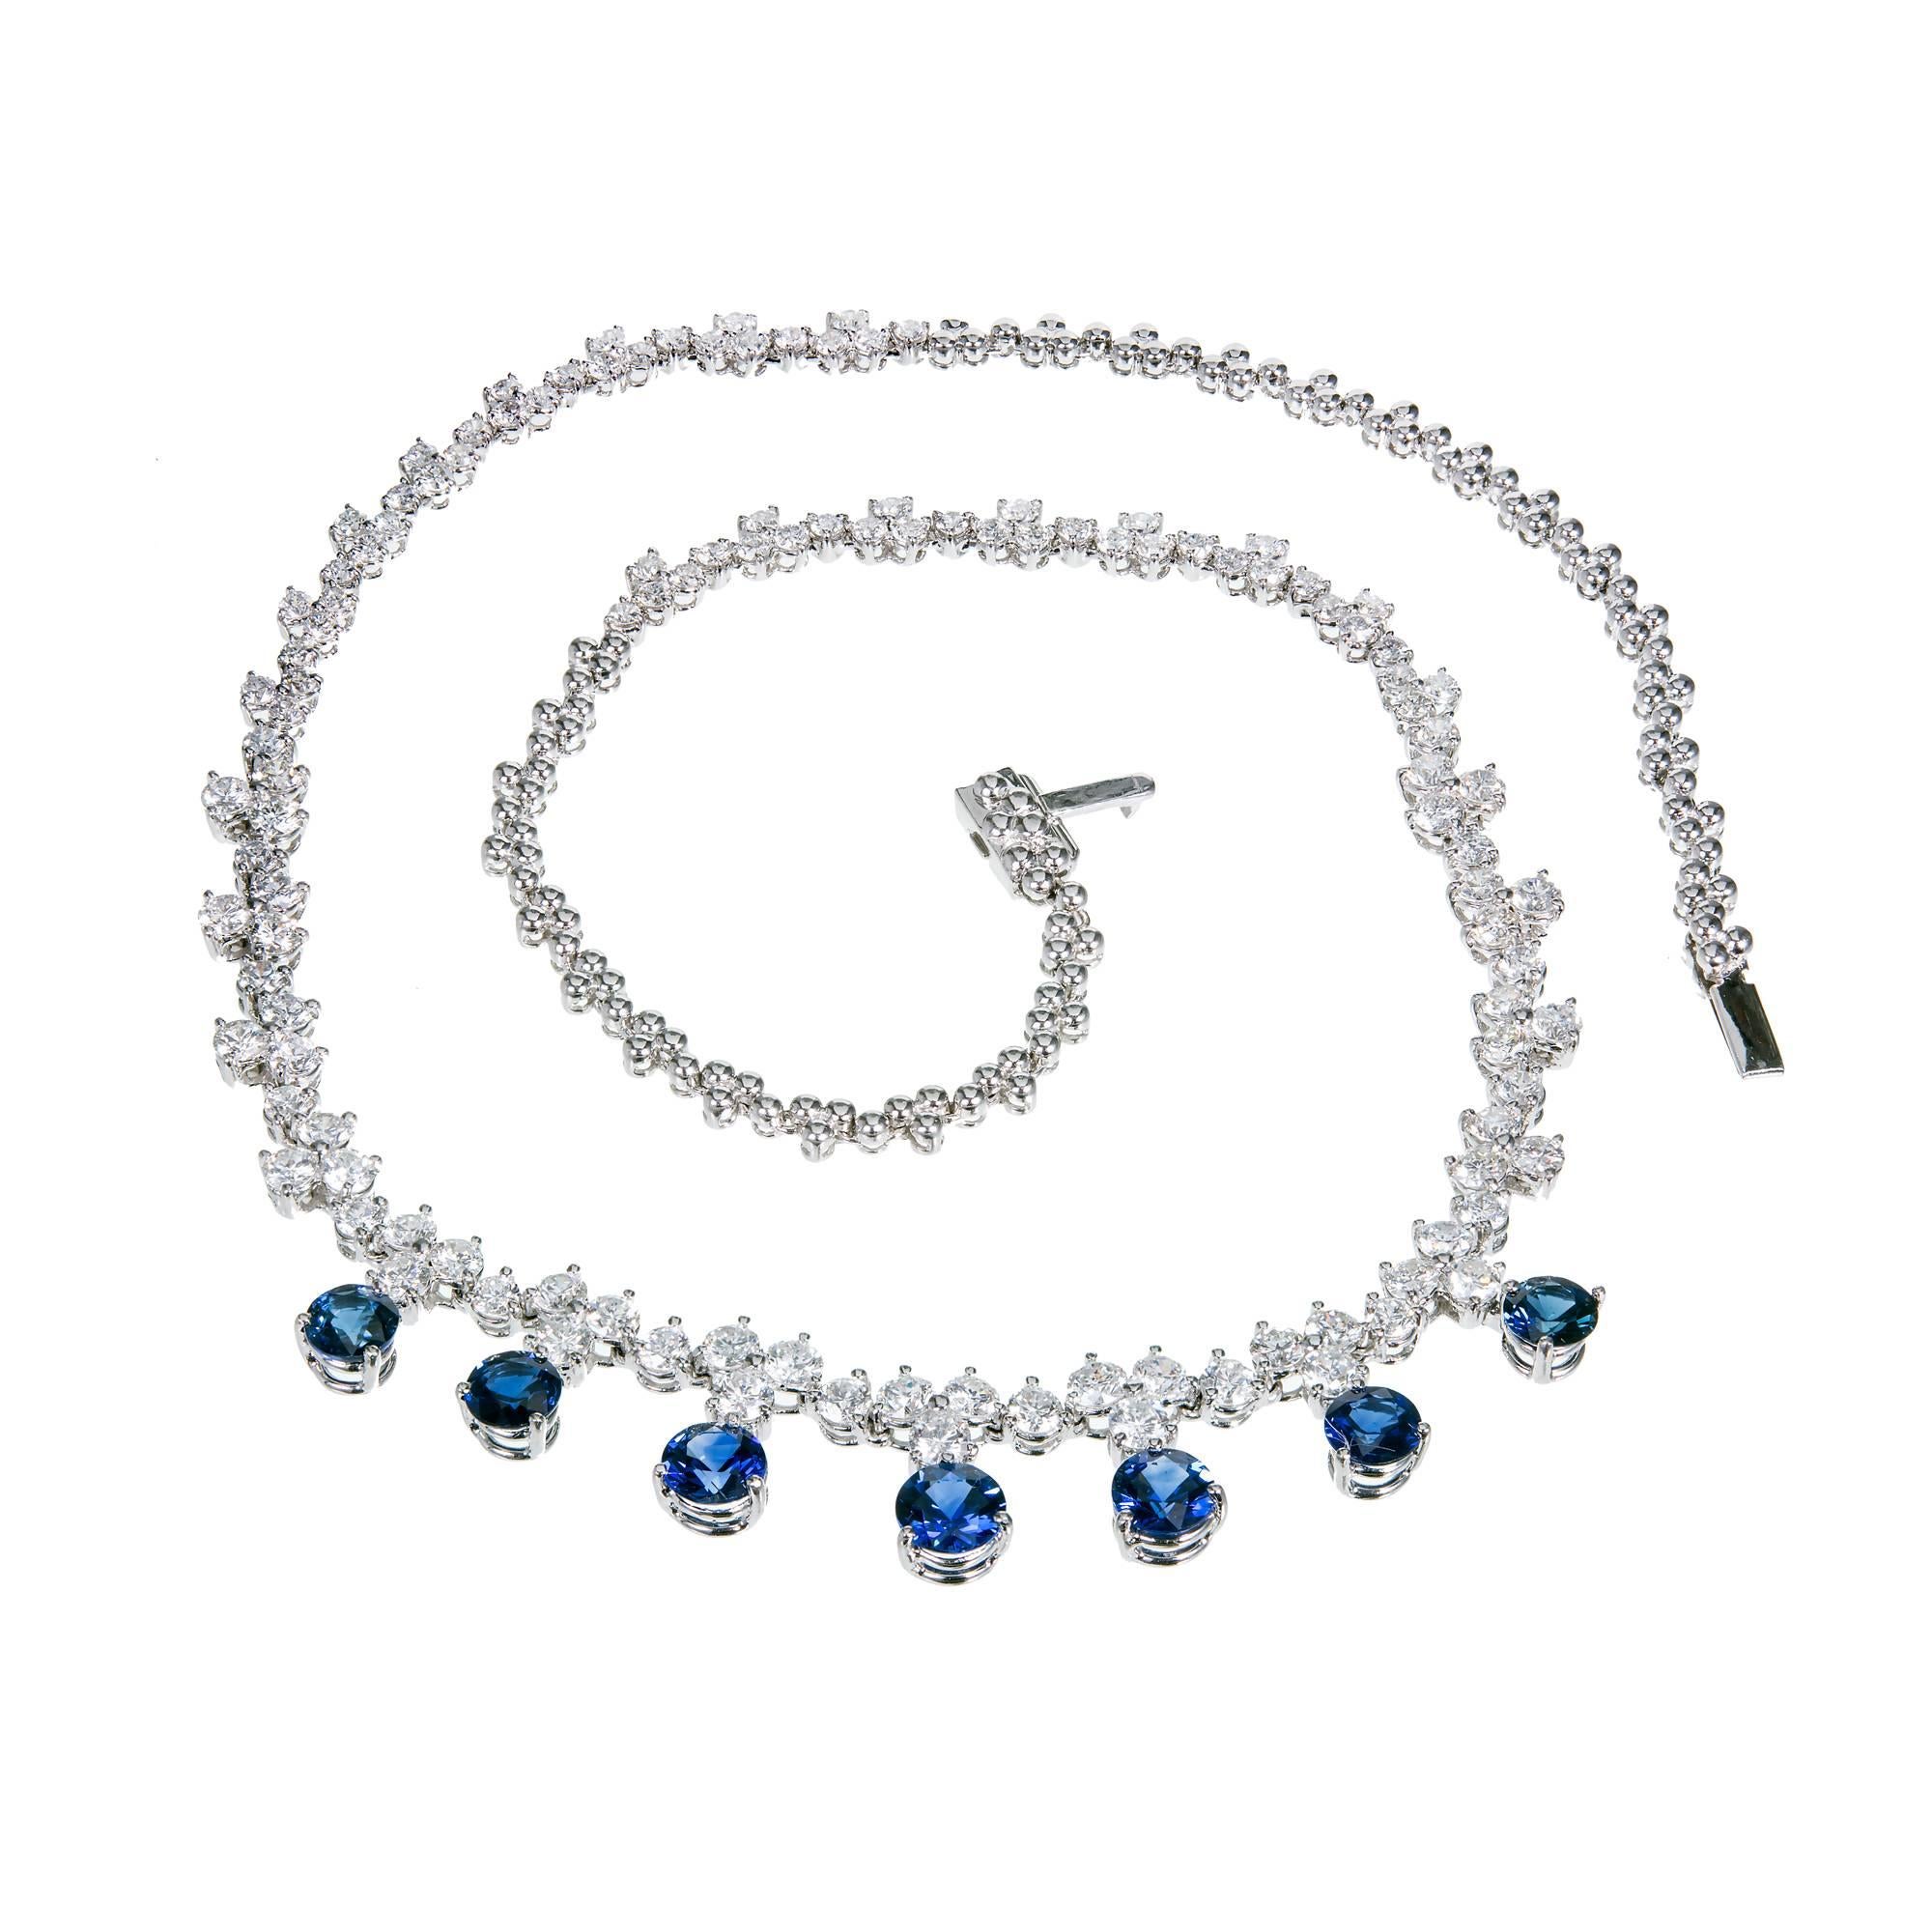 Bright blue round natural Sapphire and Diamond Platinum necklace. Hinged links of solid Platinum holding top quality gemstones. The Sapphires are GIA certified as natural corundum simple heat only. Built in catch with secure underside safety. 

124